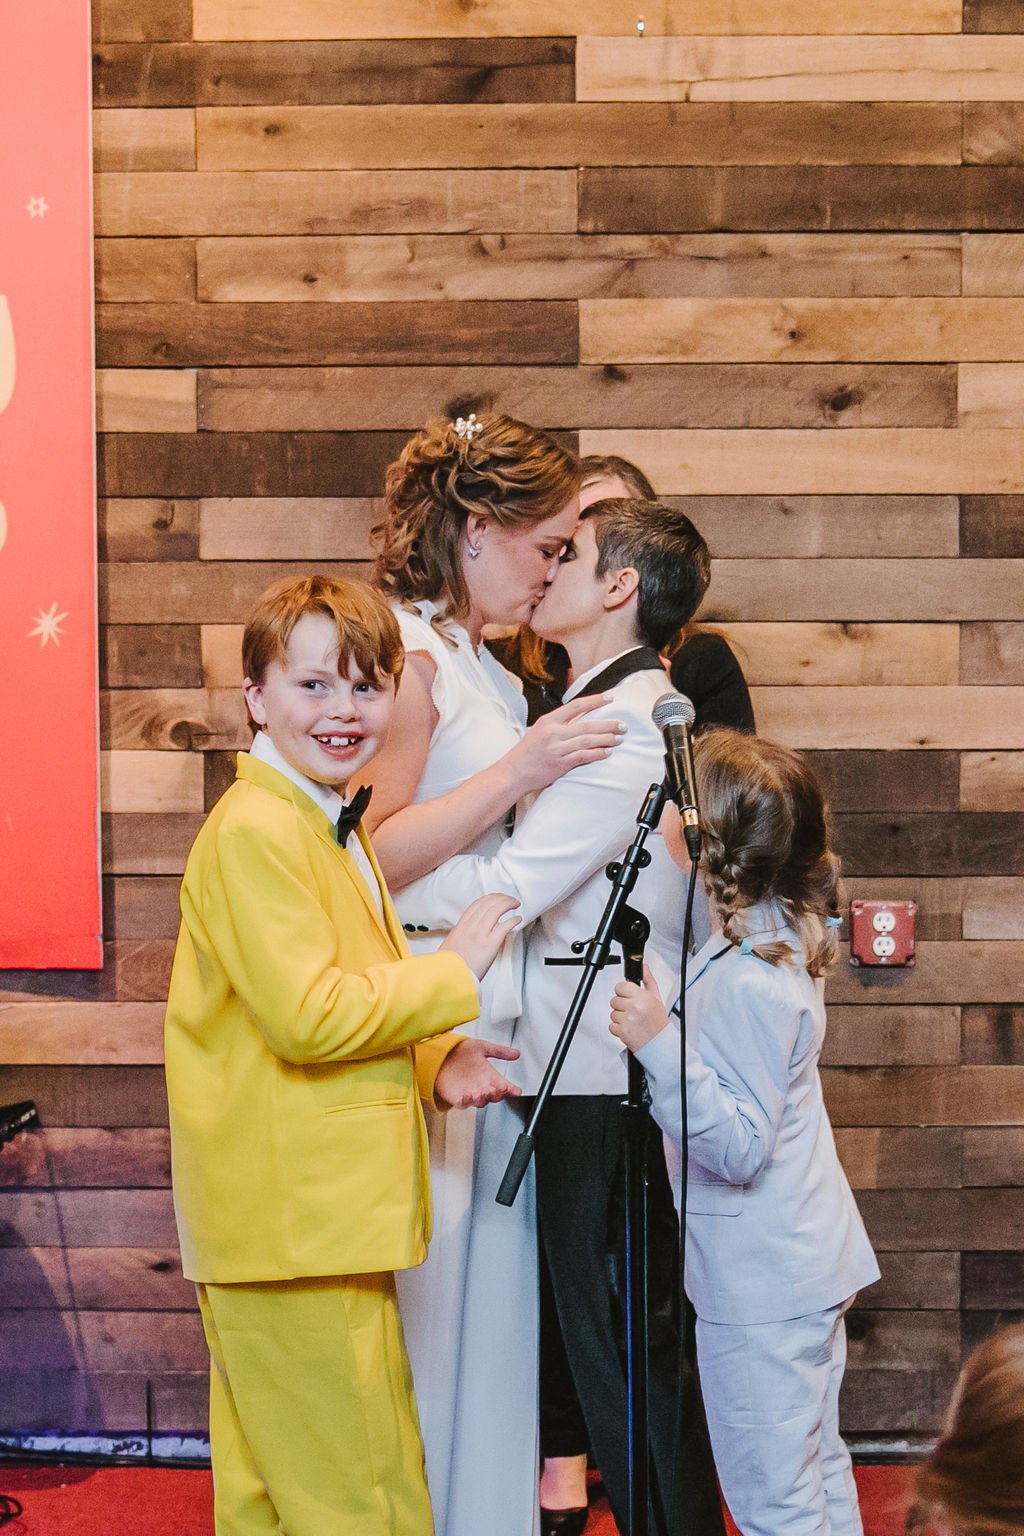 Tobey+Lindsey'sWedding-EmilyTebbettsPhotography-248 Intimate Queer Lesbian LGBTQ Winter Boston Arboretum Jamaica Plain Roslindale Wedding at the Milky Way Lounge and Restaurant in Massachusetts new england by queer elopement photographer .jpg